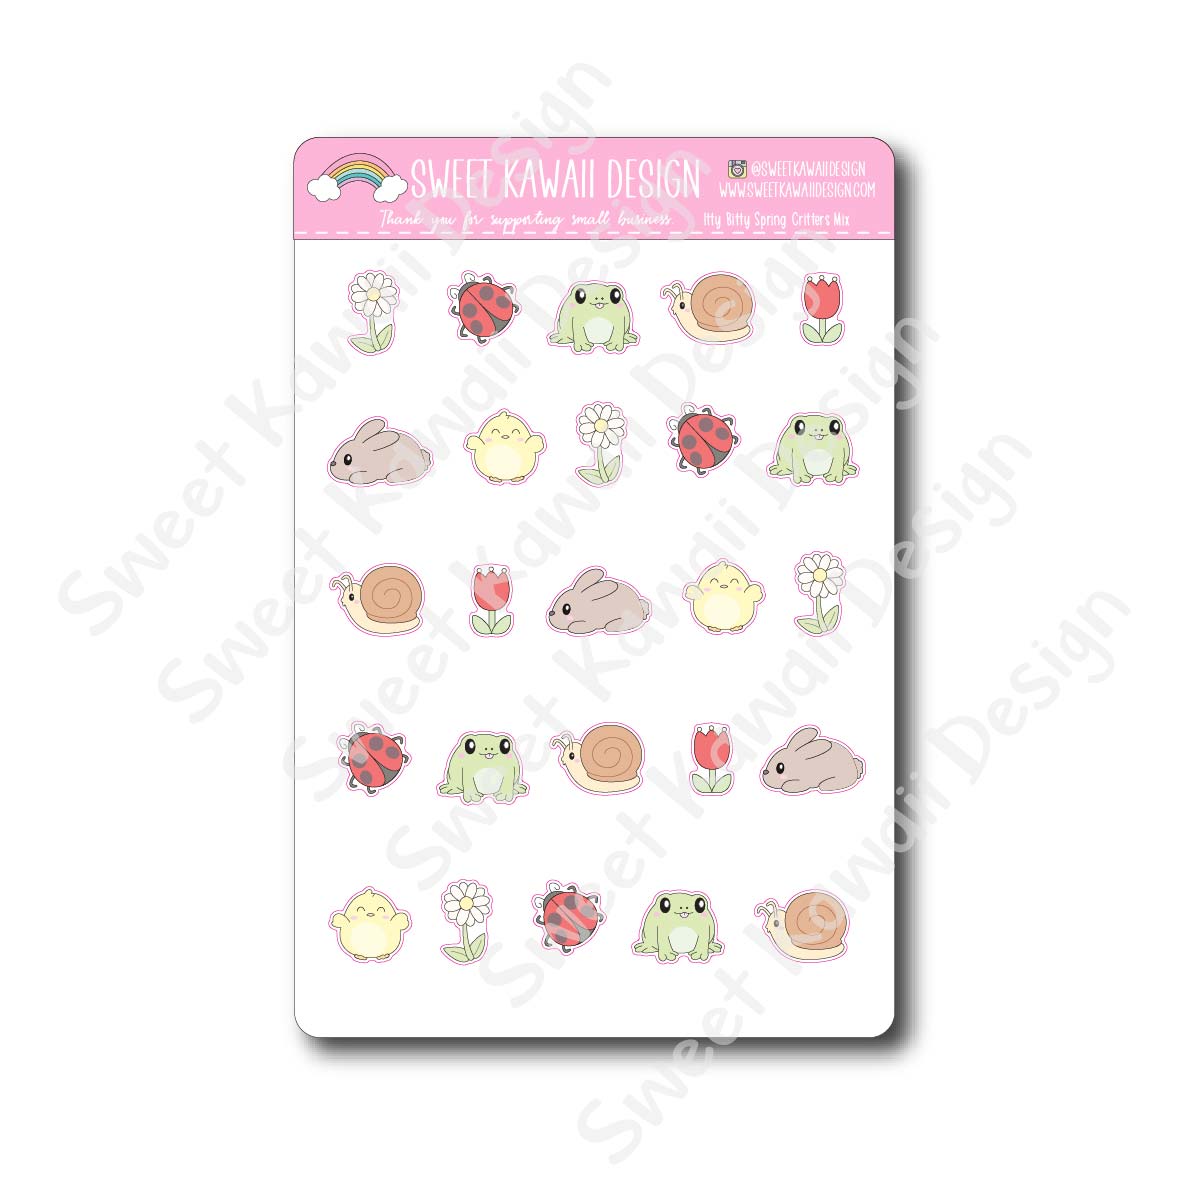 Kawaii Spring Critters Stickers